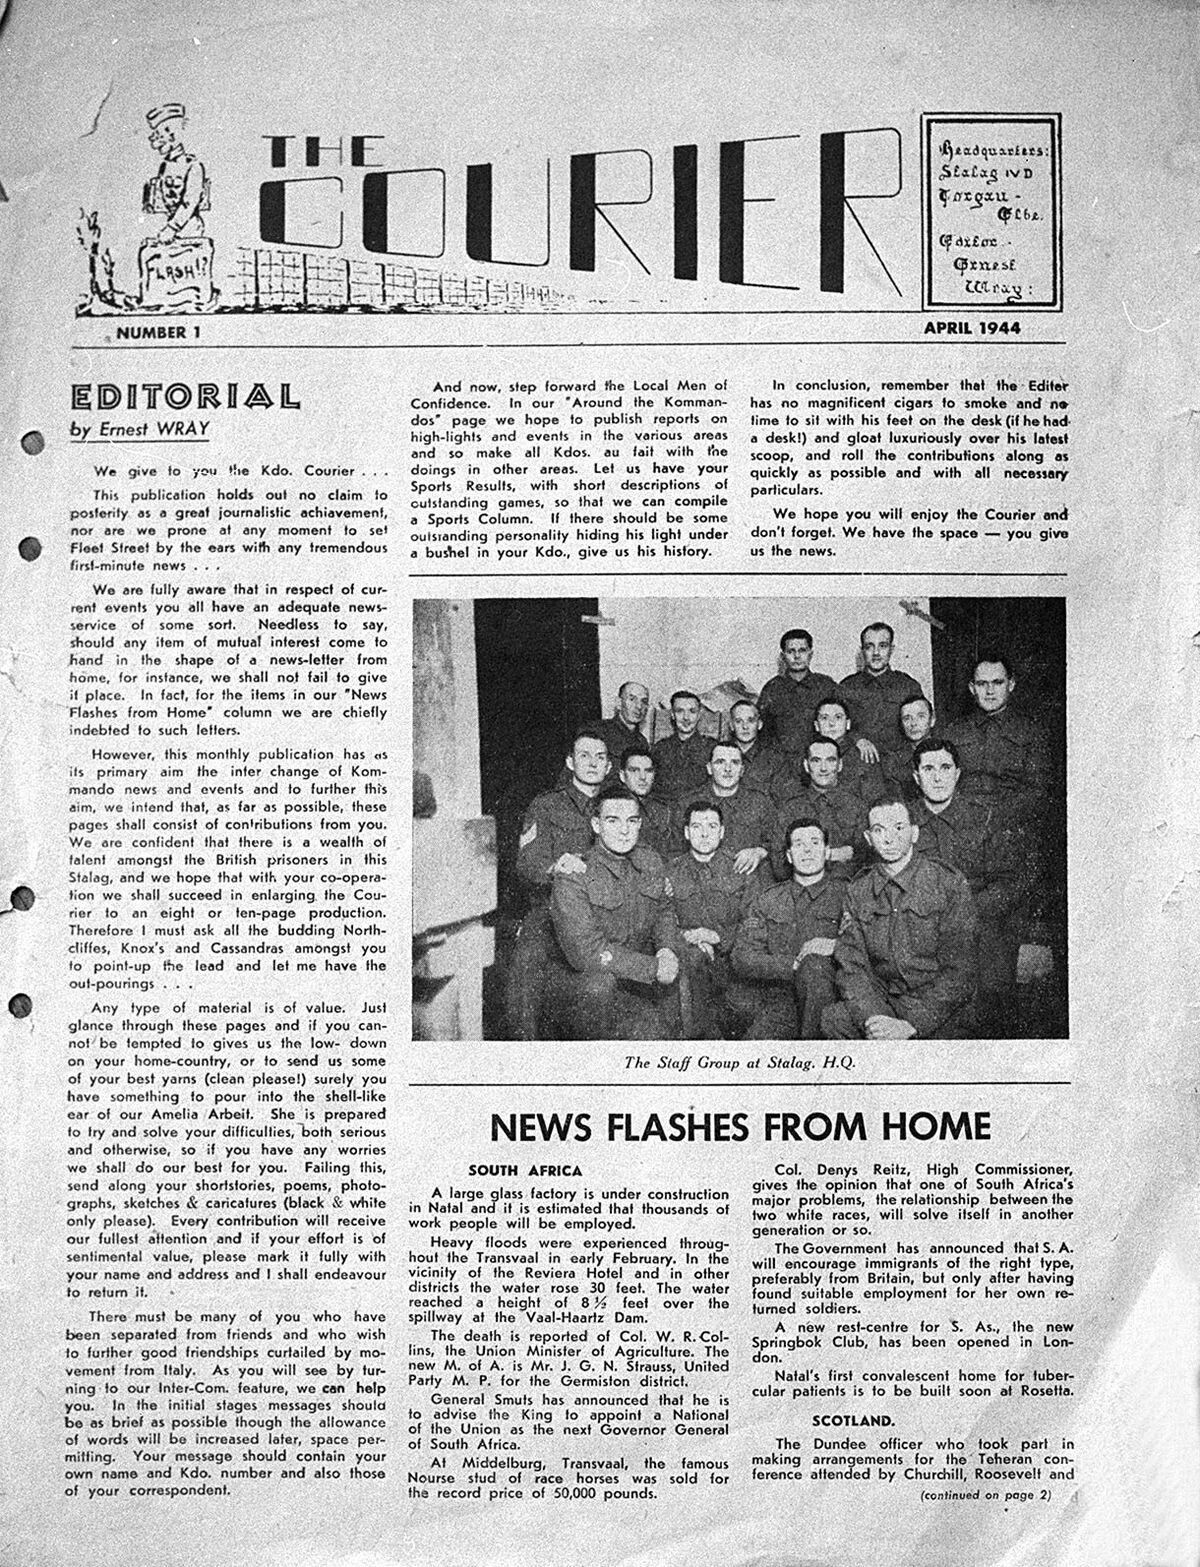 The first edition of The Courier in April 1944.